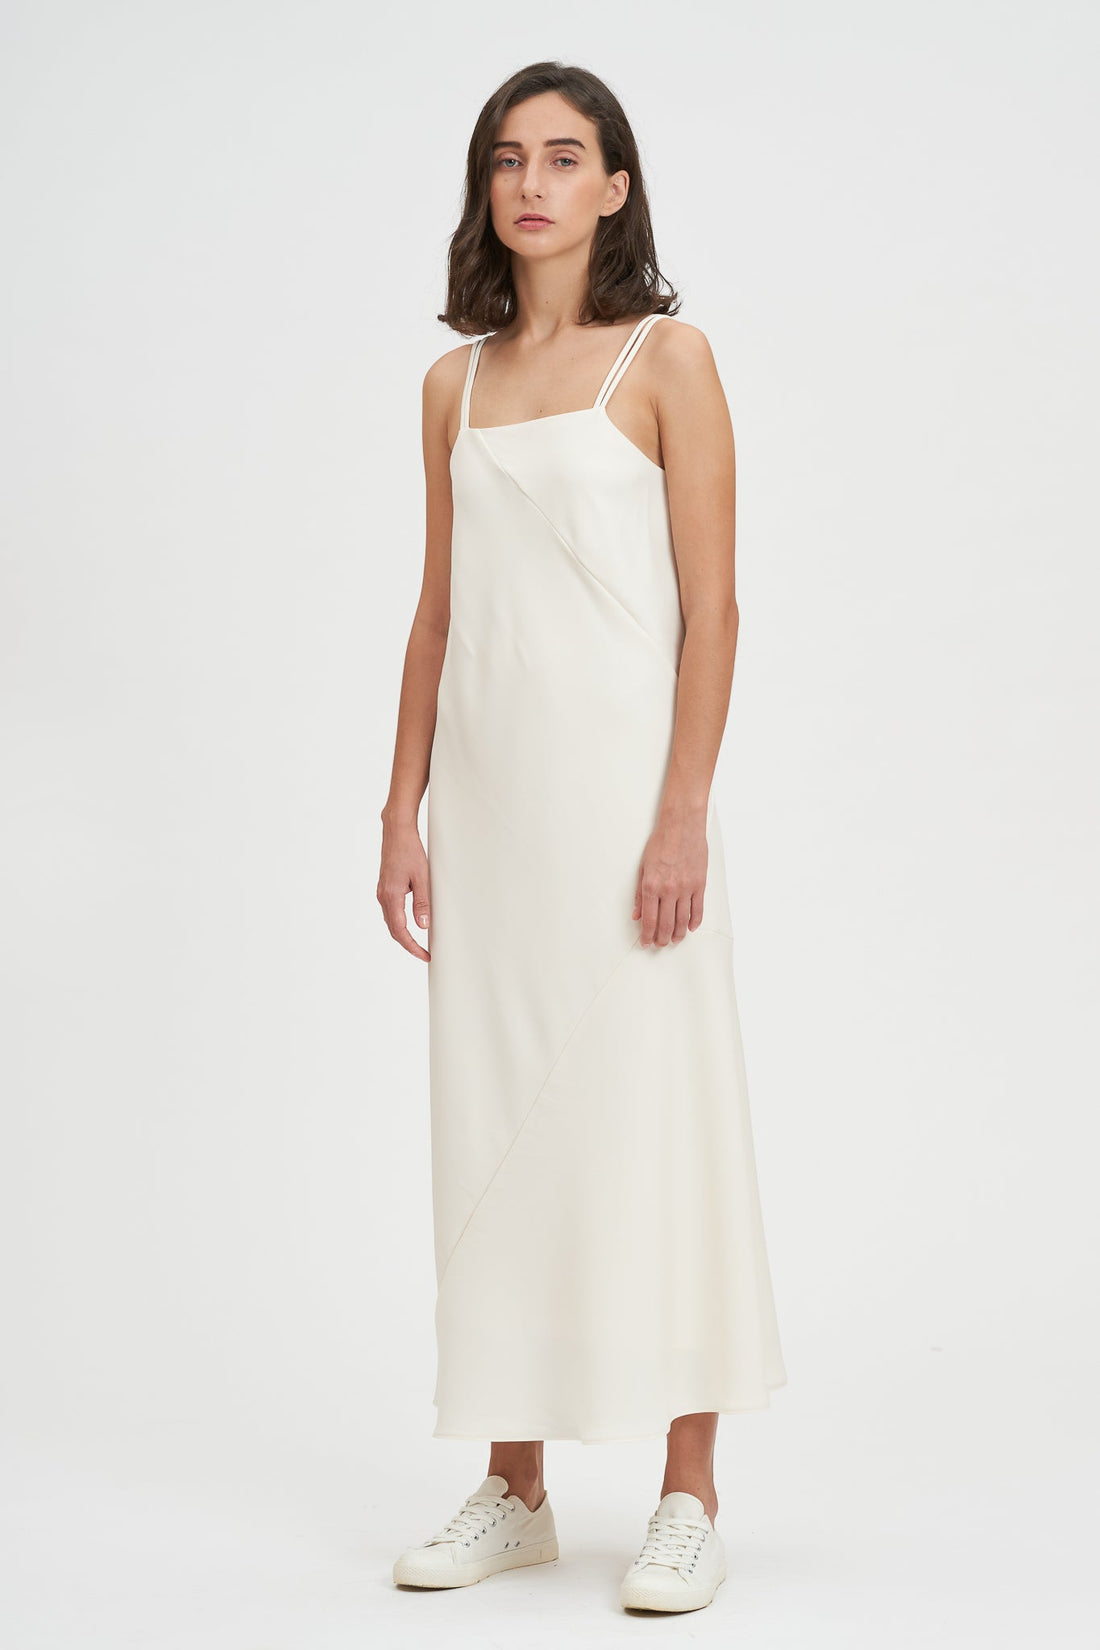 A woman with shoulder length hair is wearing an ankle length white scrappy dress. She is wearing white tennis shoes.